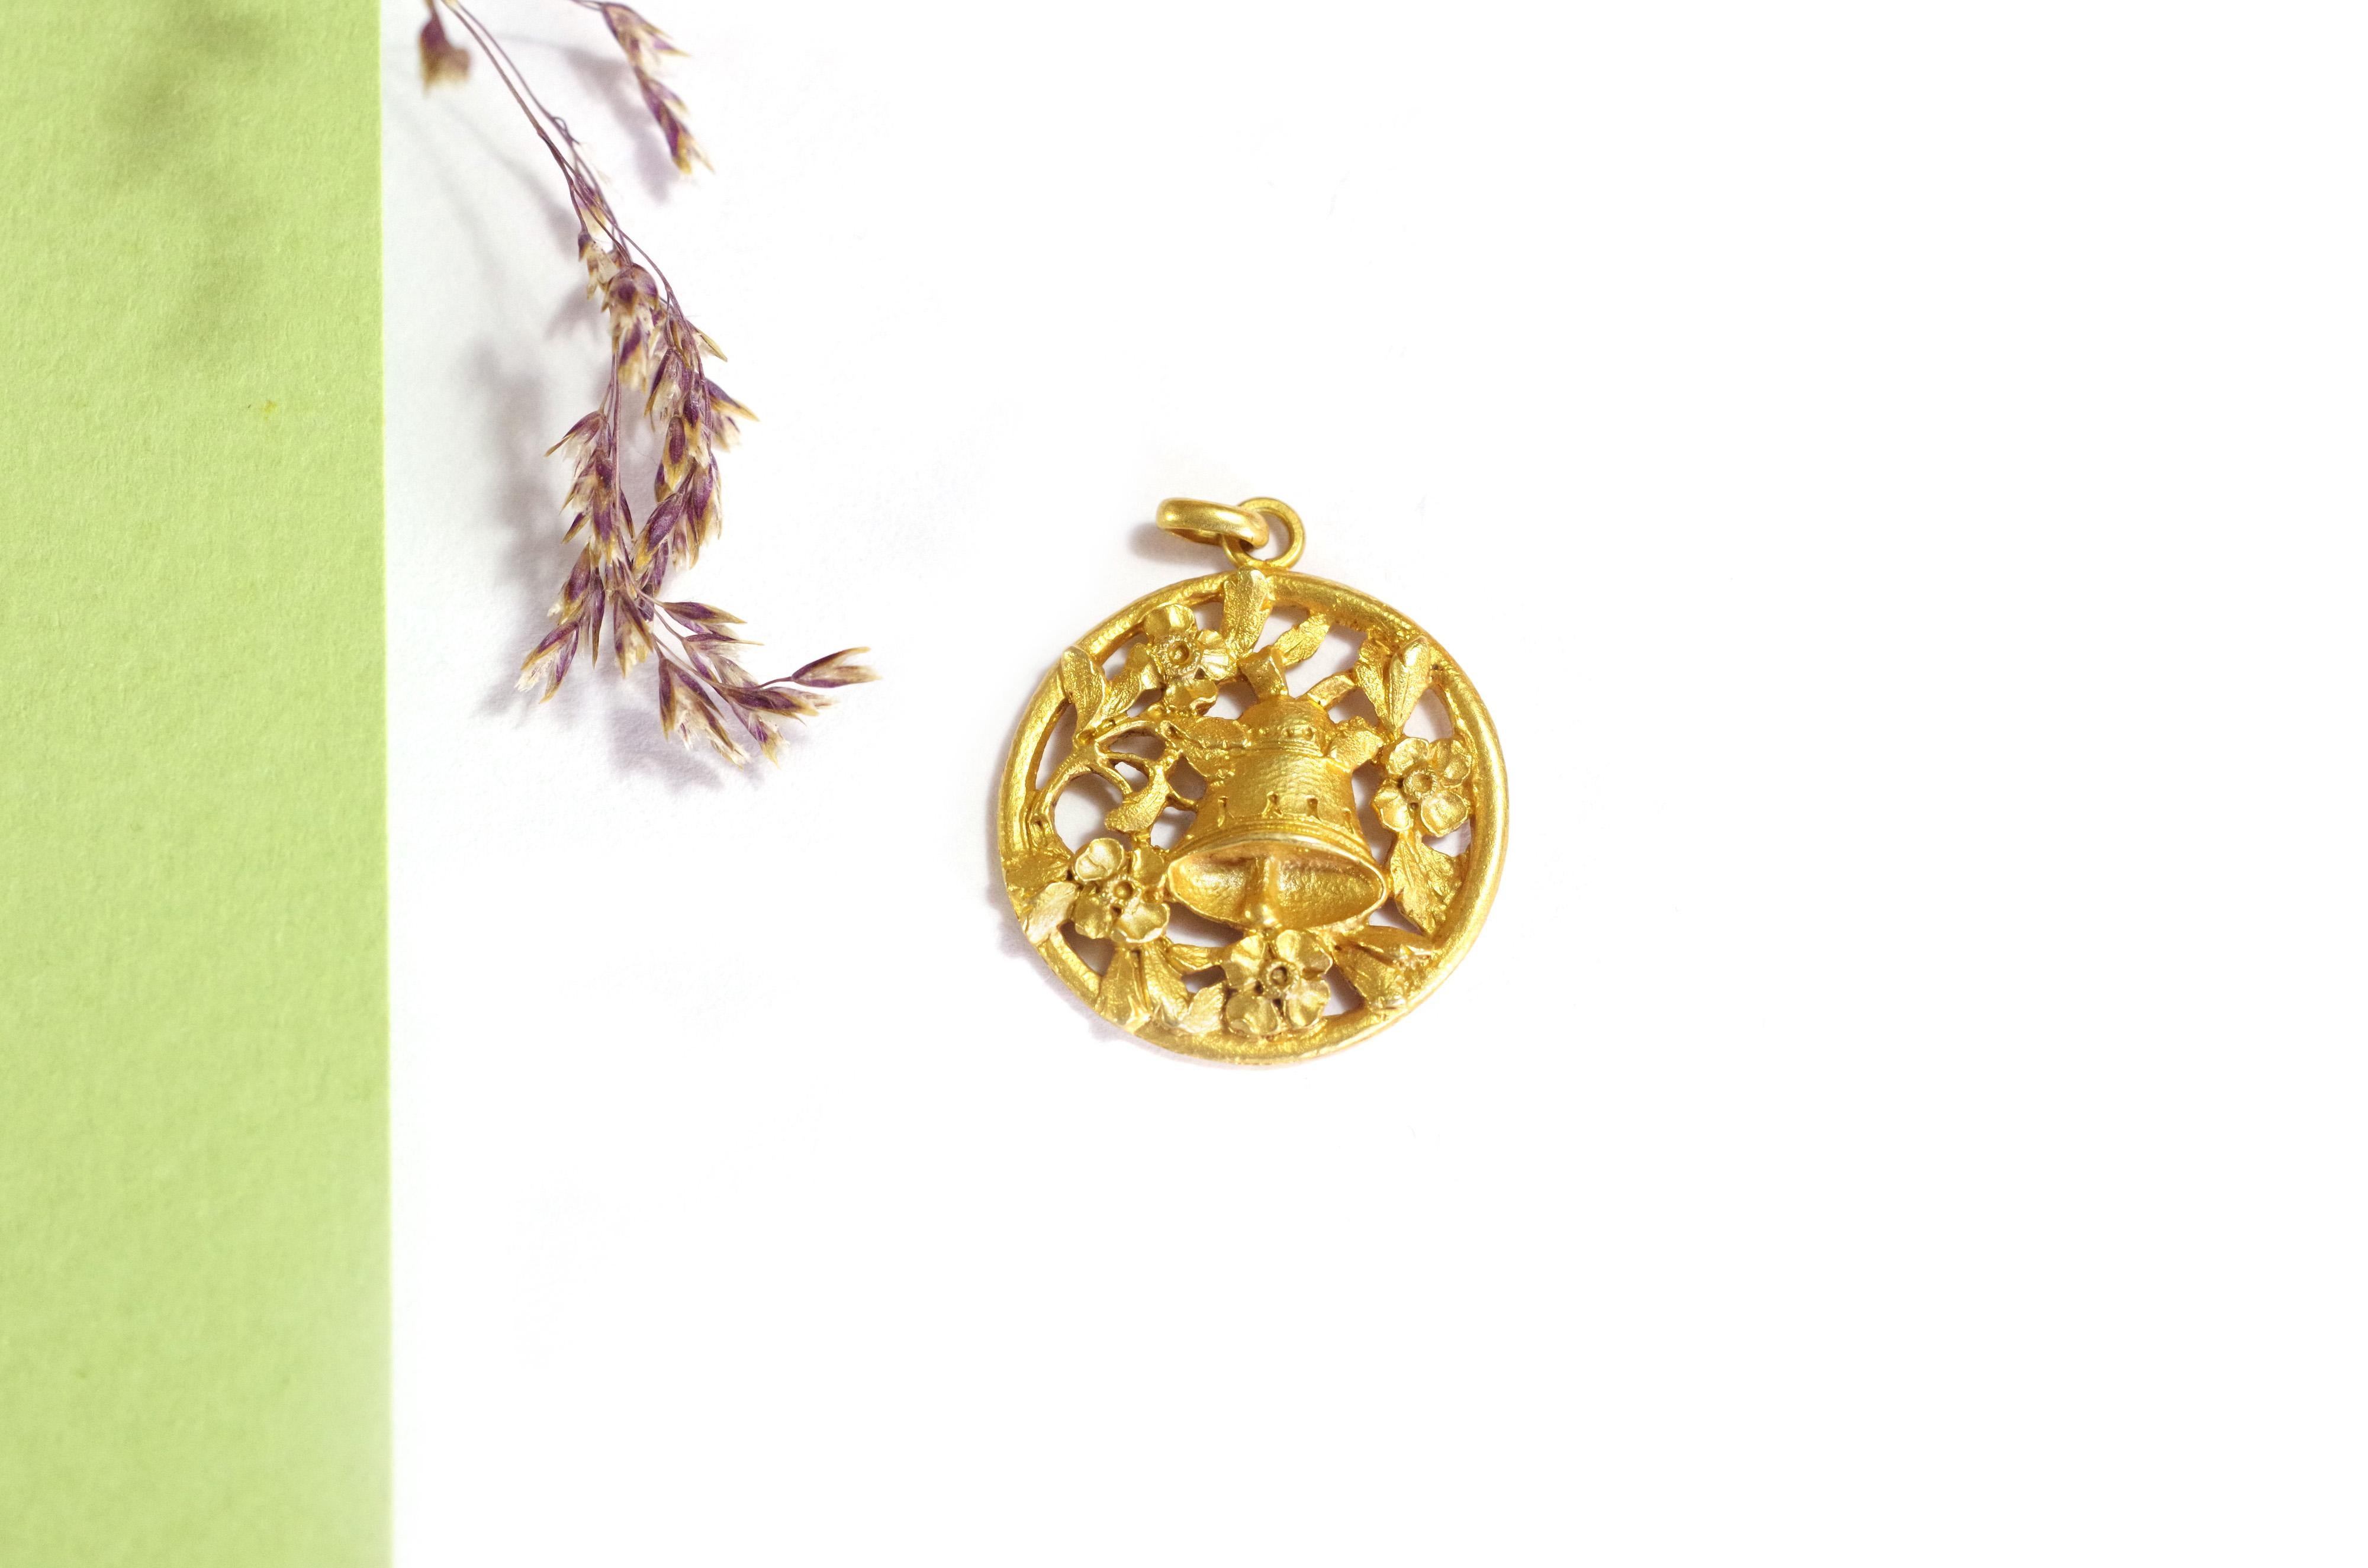 Art Nouveau bell gold medal in 18 karat yellow gold. In the center of the medal is a bell, surrounded by flowering branches. The jewel is openwork and matte gold. The bell probably represents the Angelus, a prayer traditionally announced three times